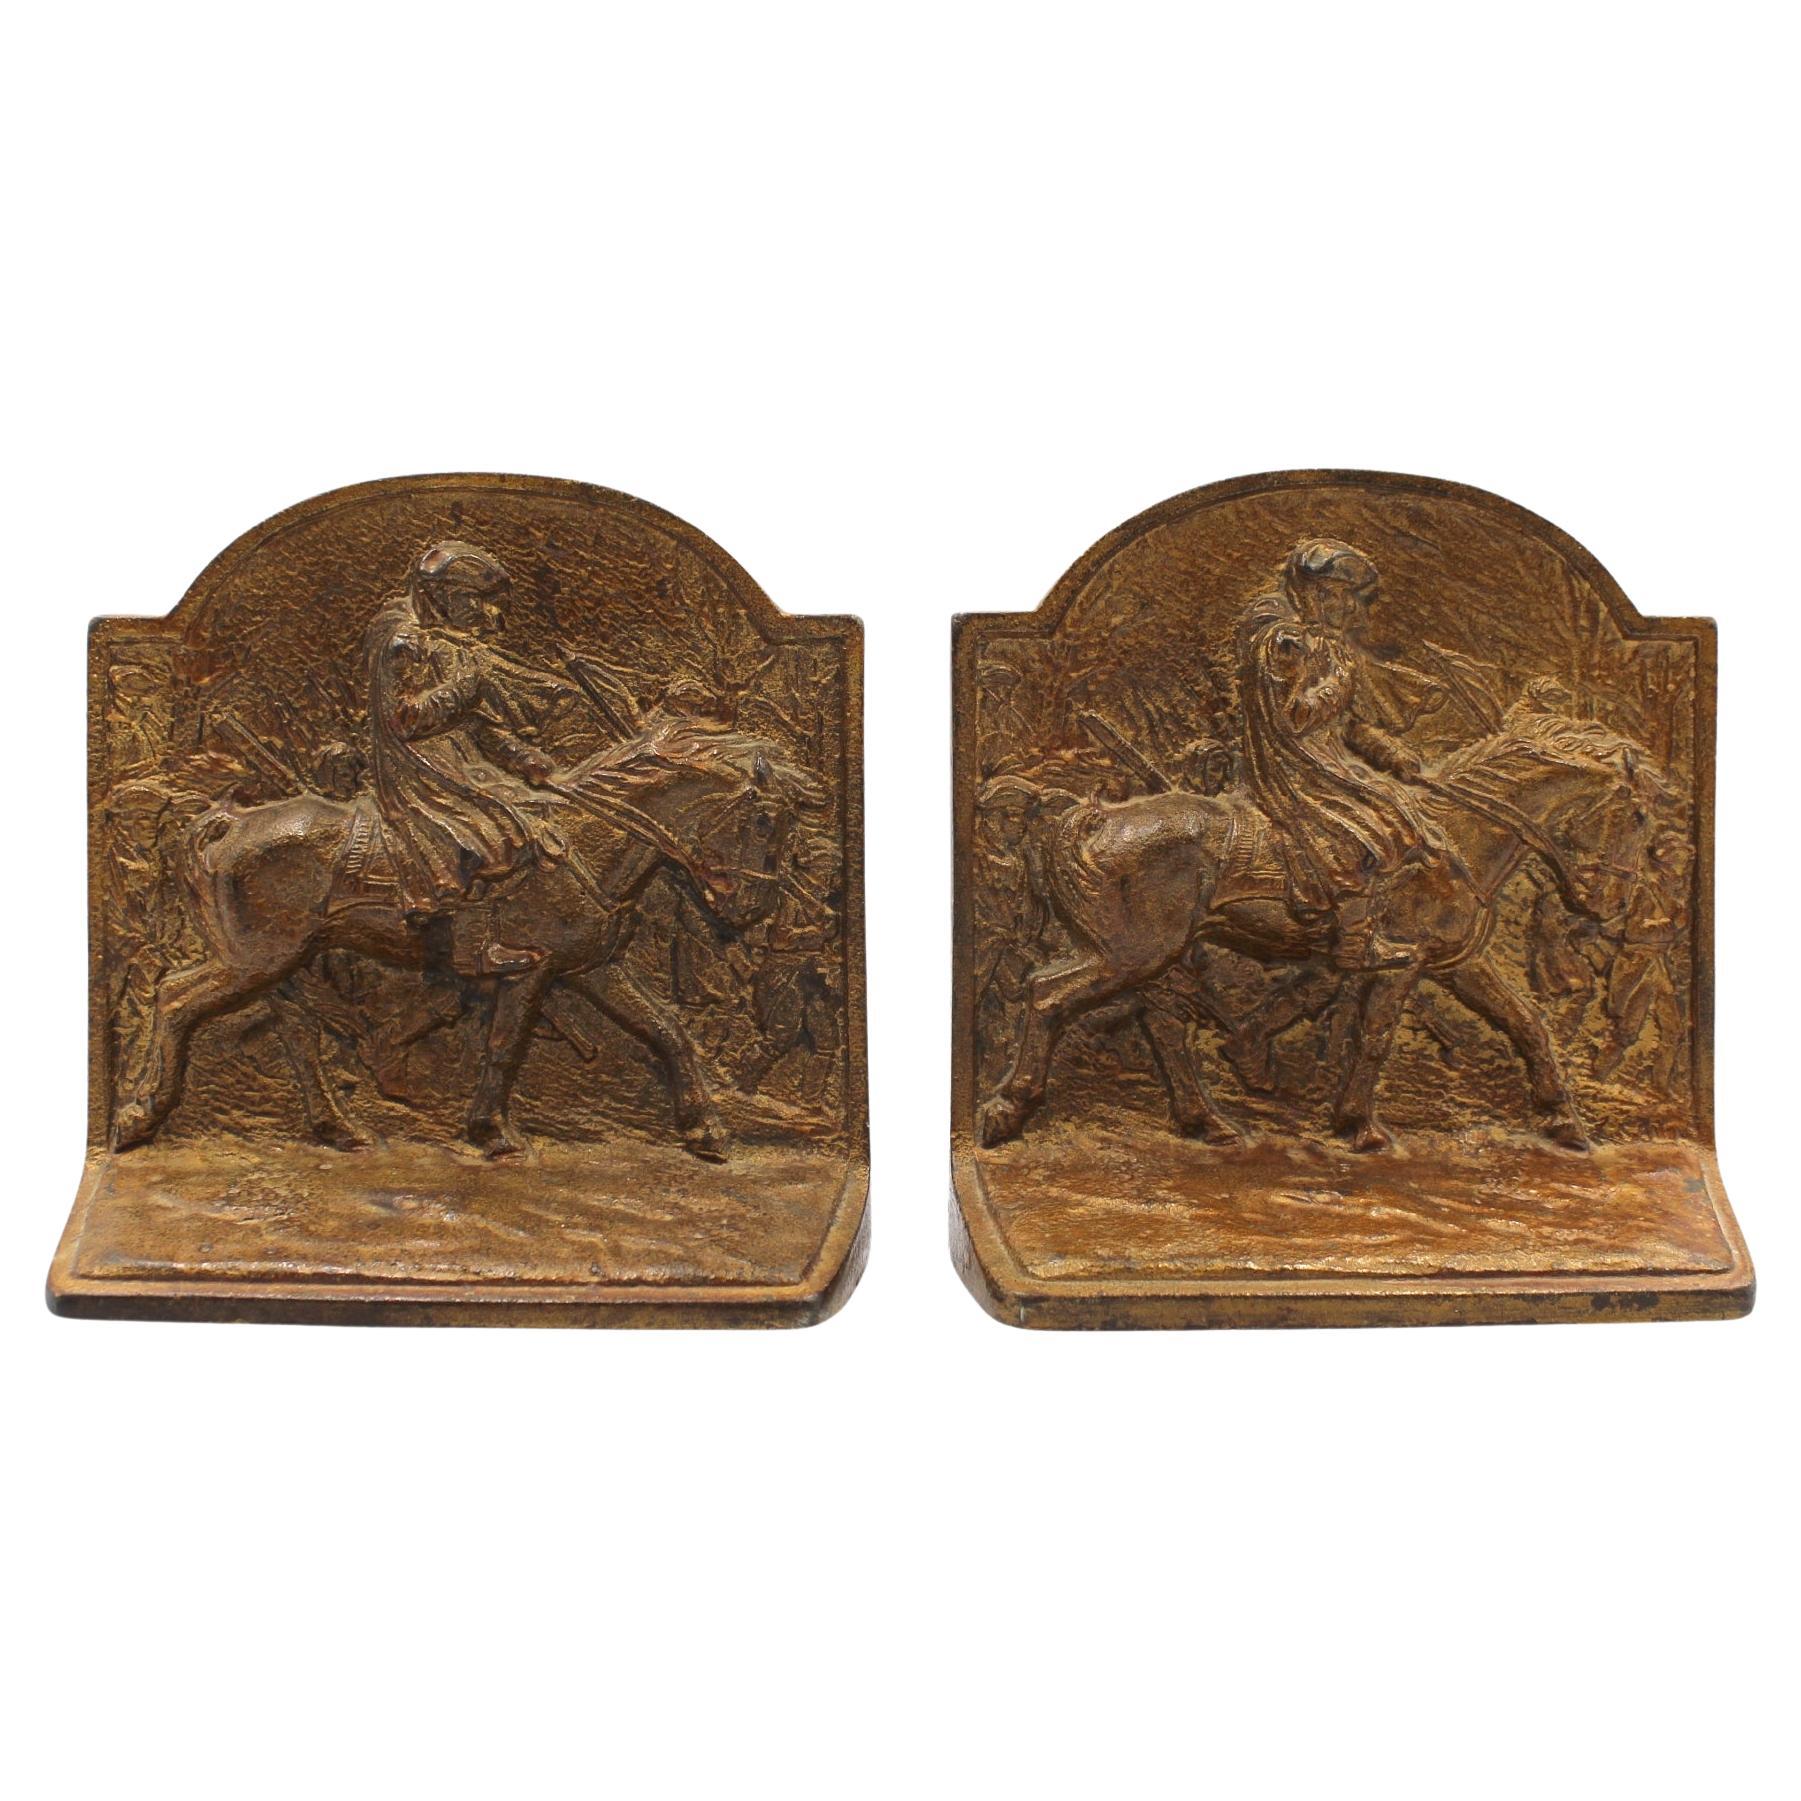 Vintage Washington at Valley Forge Bookends by Hubley, Circa 1925